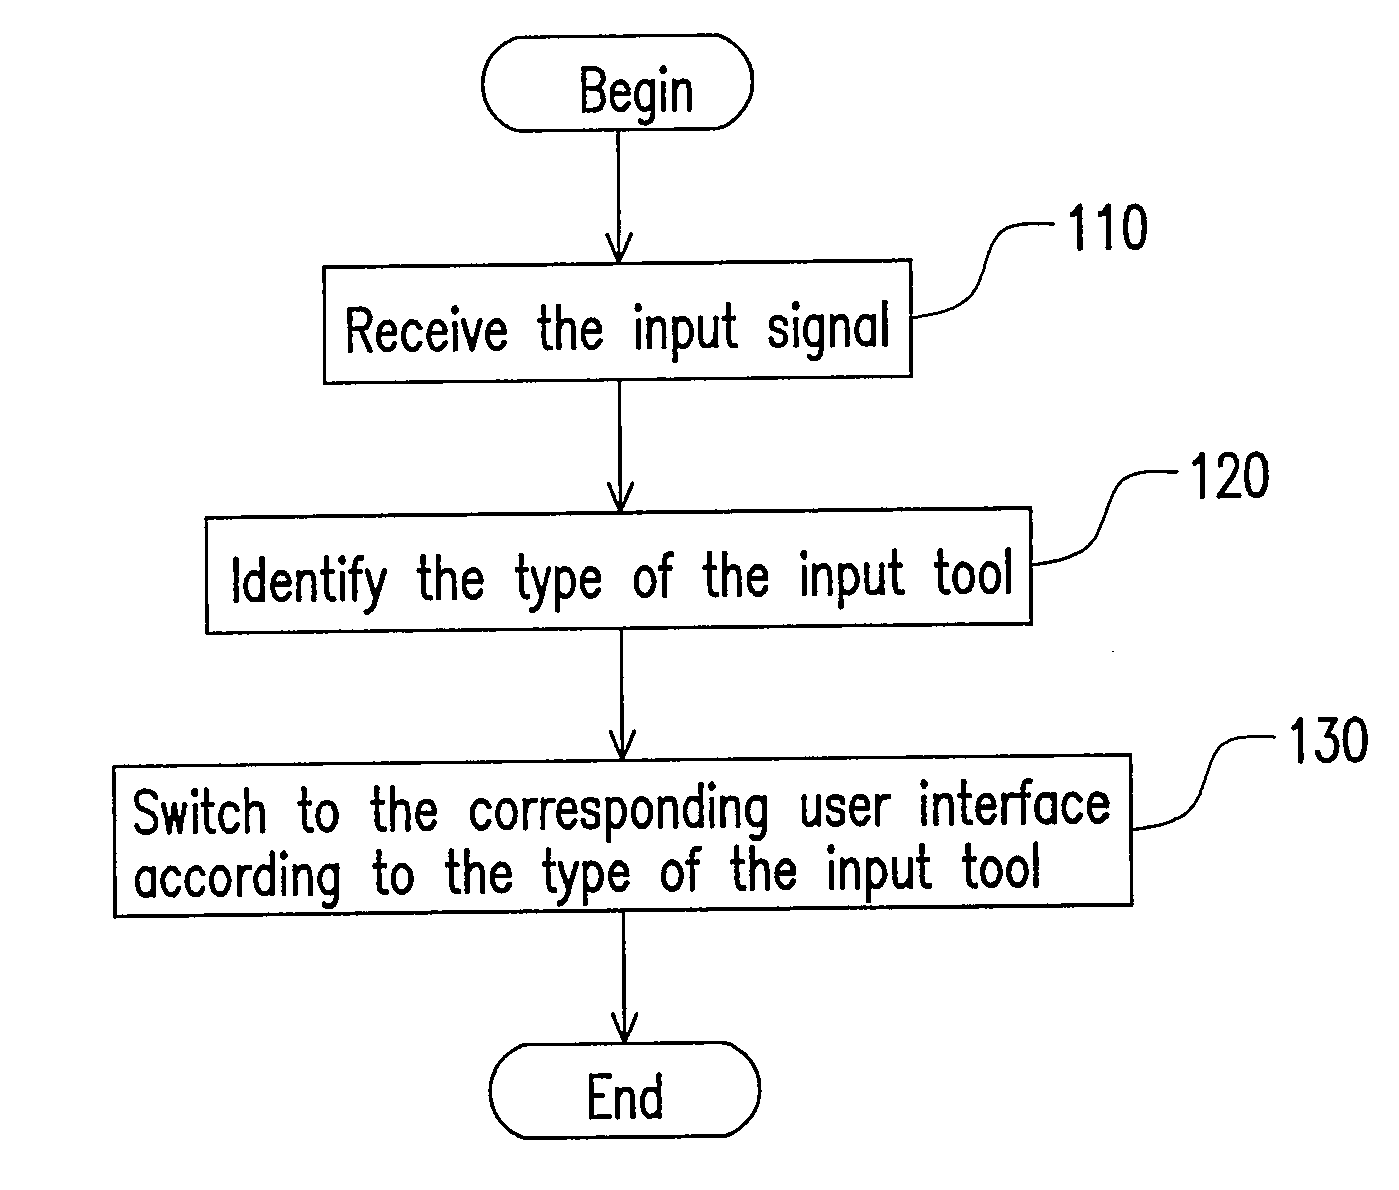 Method for identifying the type of an input tool for a handheld device